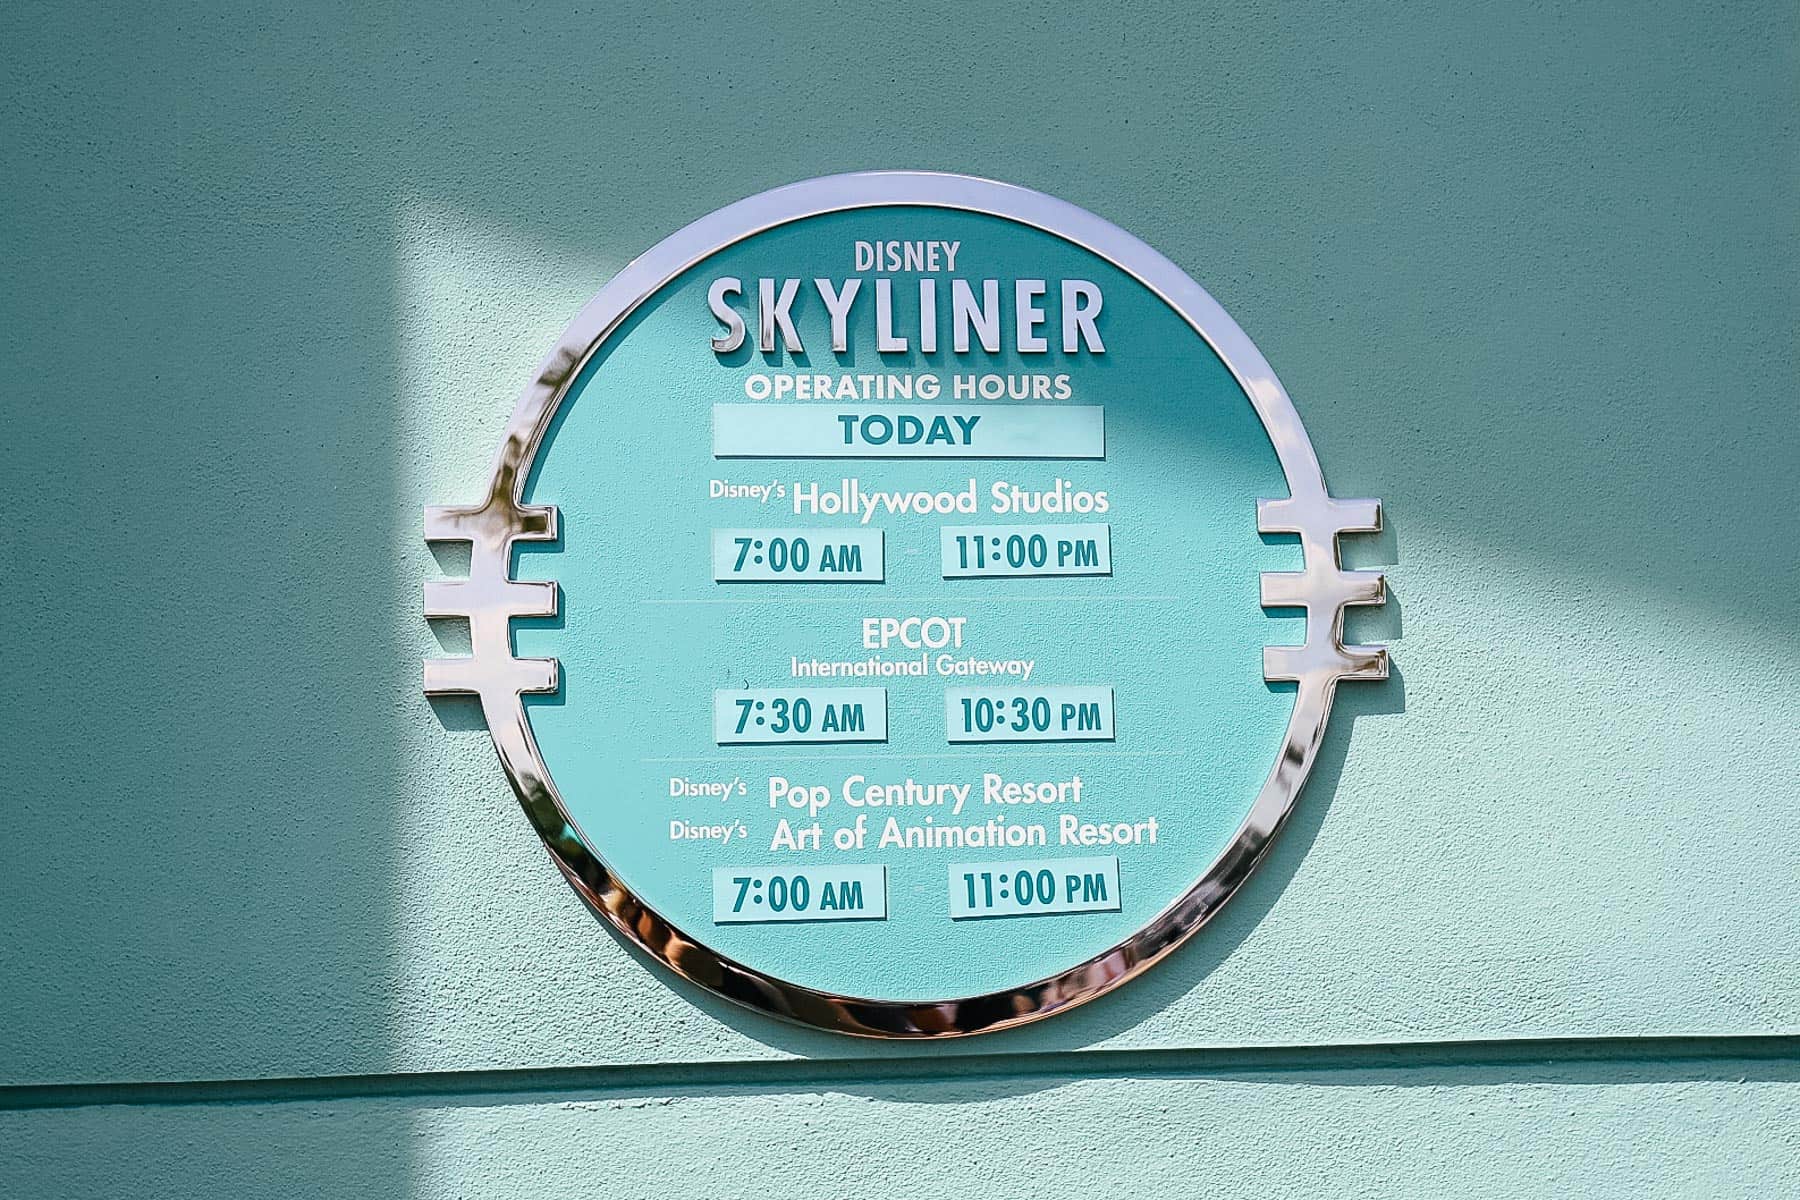 signage at Disney's Hollywood Studios for the Skyliner and its hours 